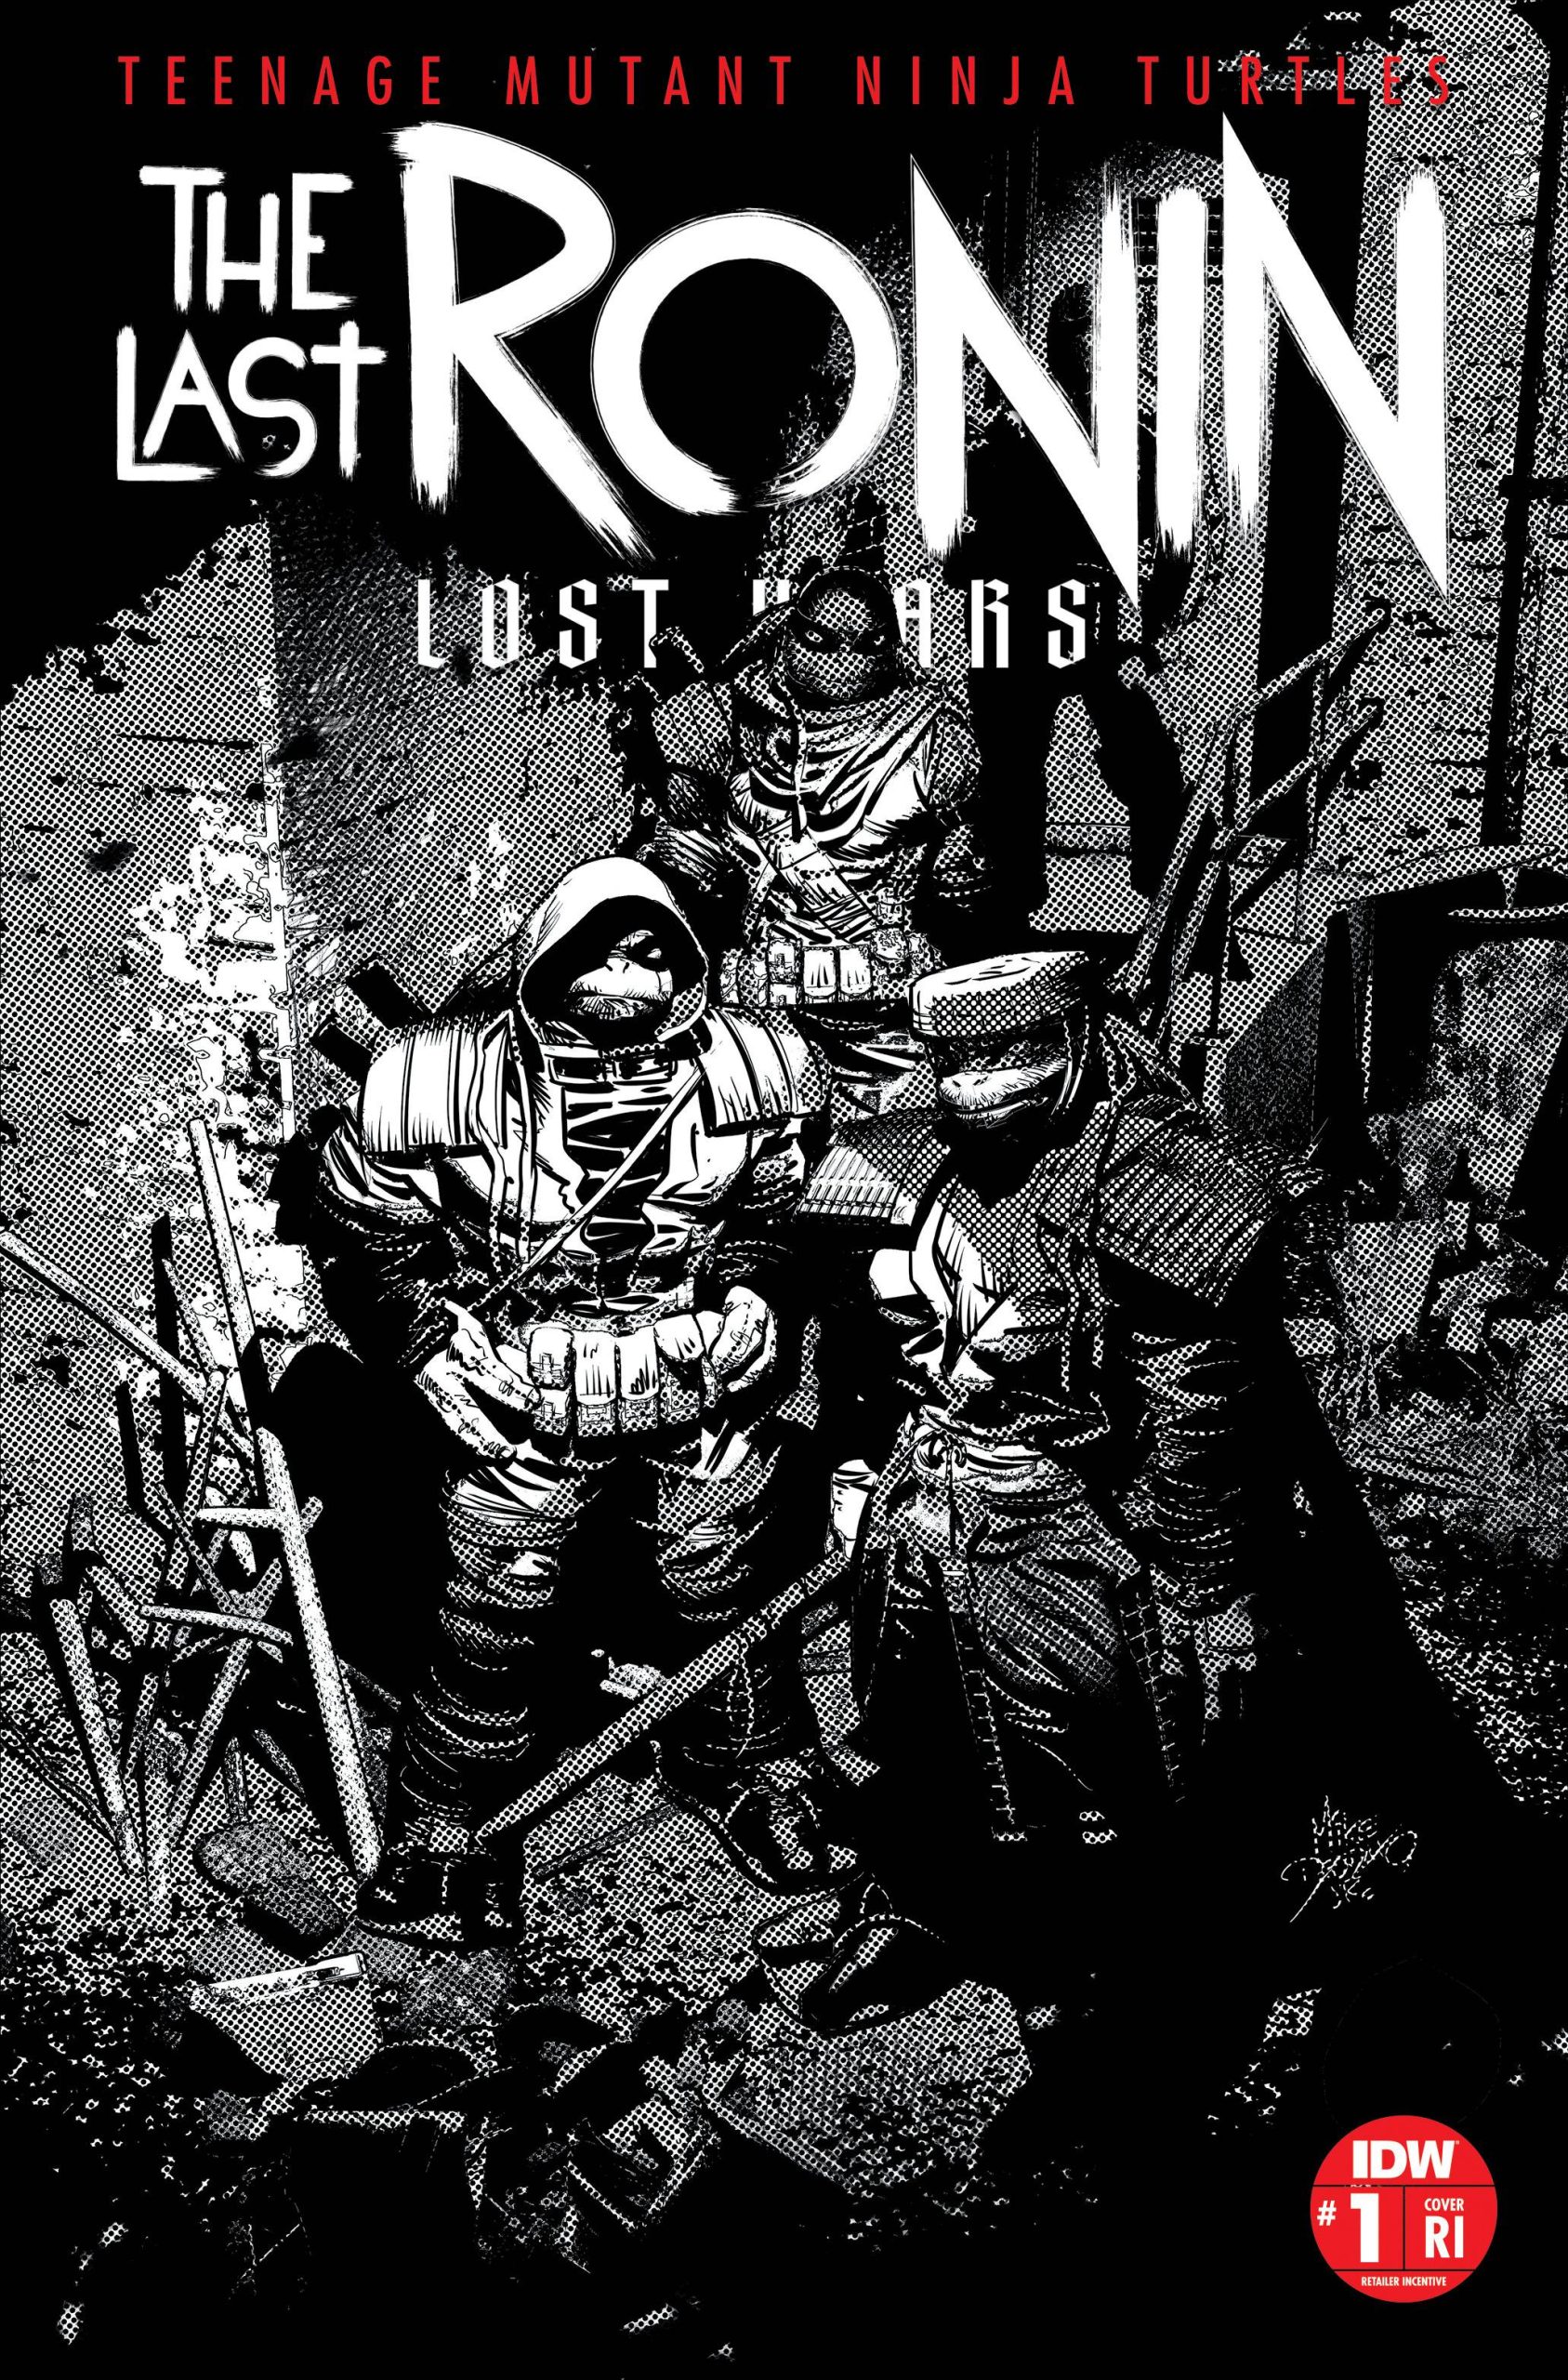 TMNT LAST RONIN LOST YEARS #1 (1/50 Mike Deodato Trade Dress Black &  White)